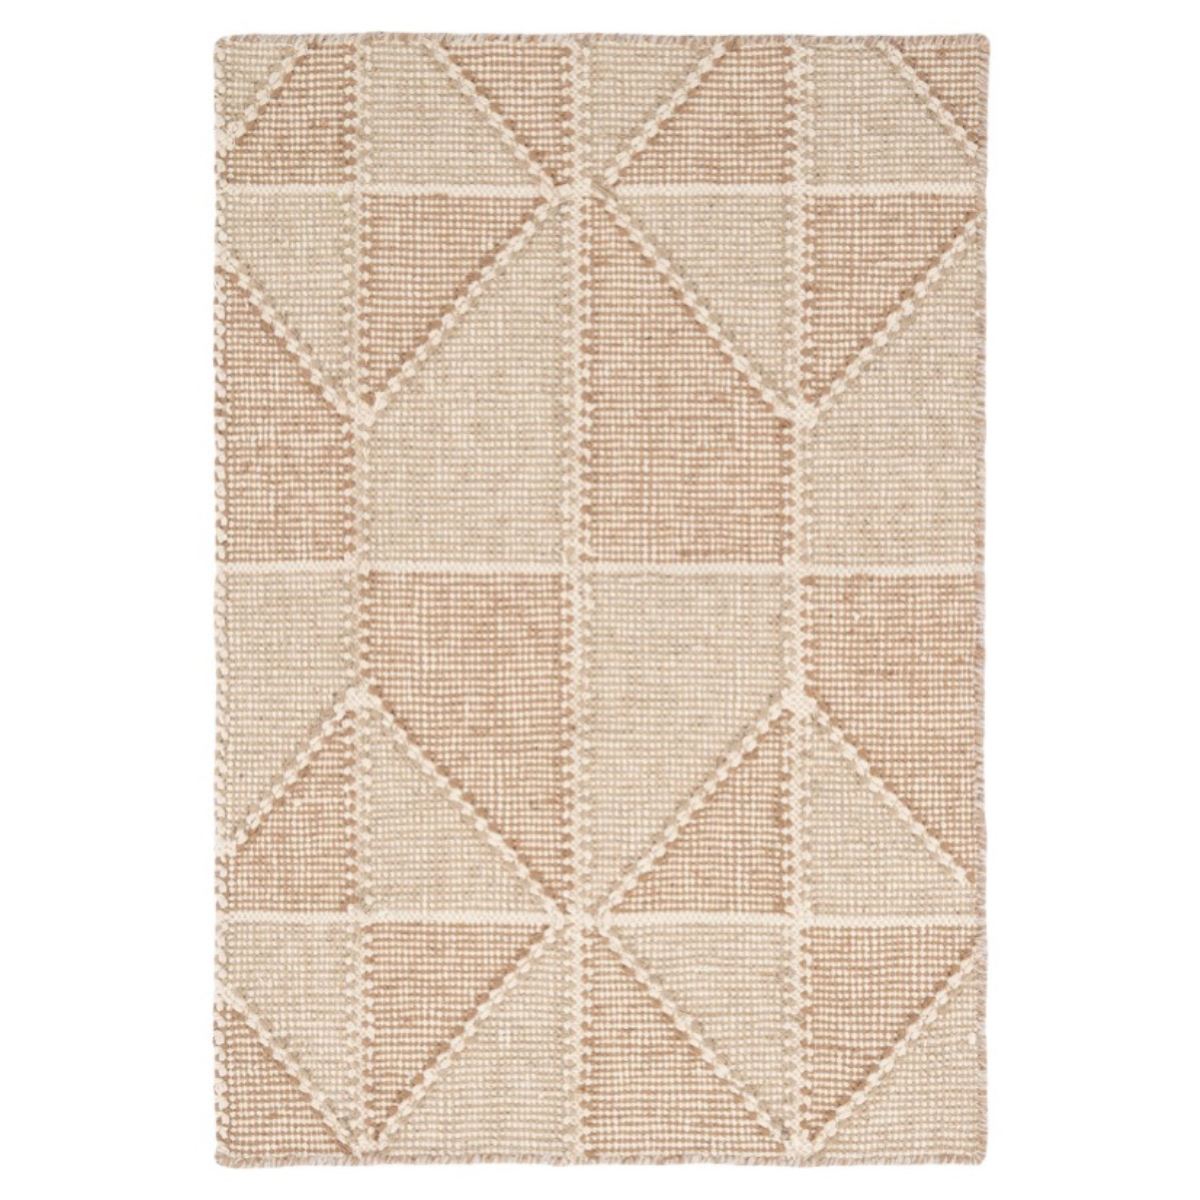  Ojai Wheat Loom Knotted Cotton Rug. Top view.